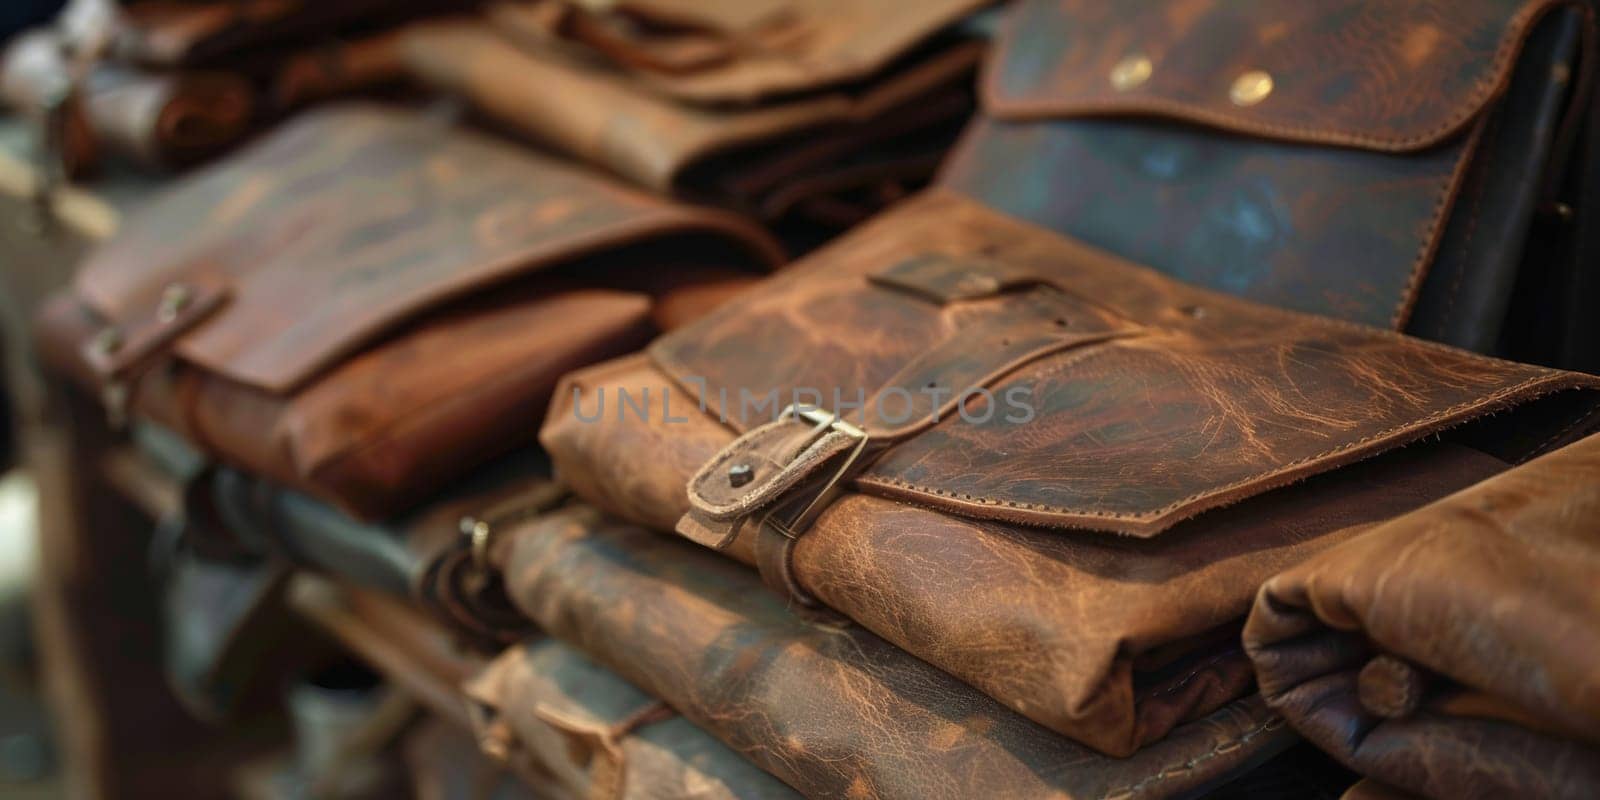 Leatherworking, handcrafted leather goods, such as bags, wallets, or shoes, showcasing the quality of craftsmanship